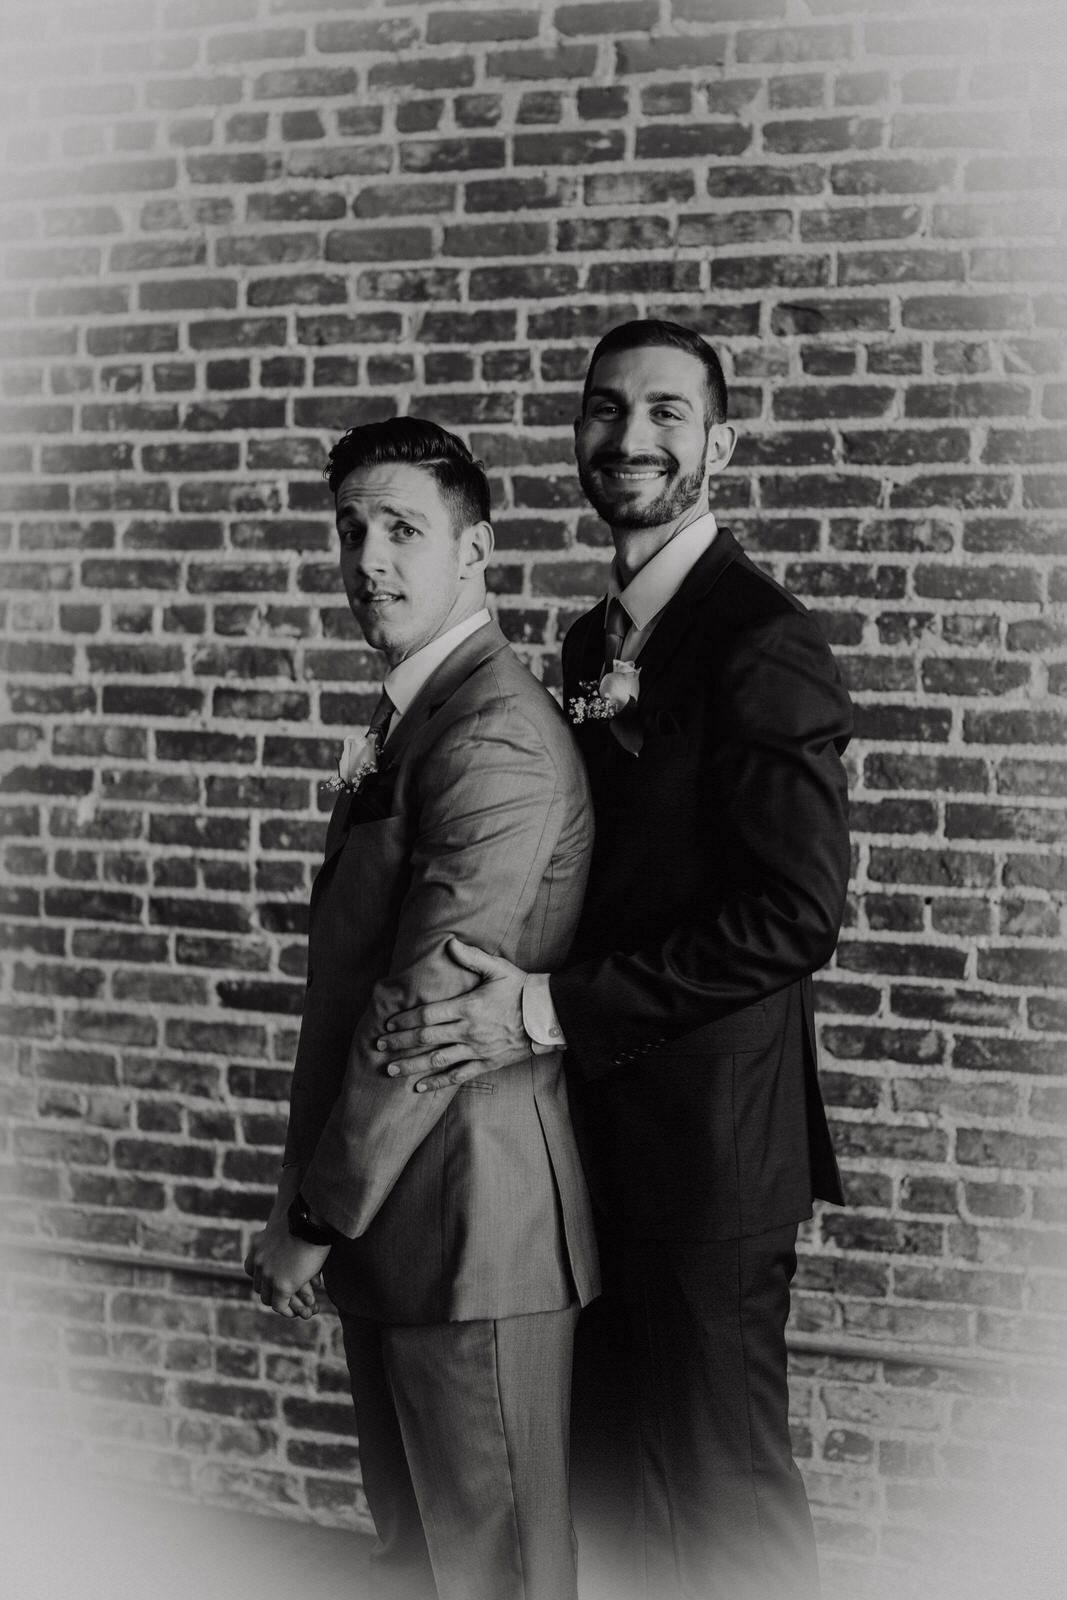 Groom and groomsman take silly prom reenactment photo | Candid, warm wedding photography | Franciscan Gardens wedding in San Juan Capistrano, CA by Kept Record www.keptrecord.com